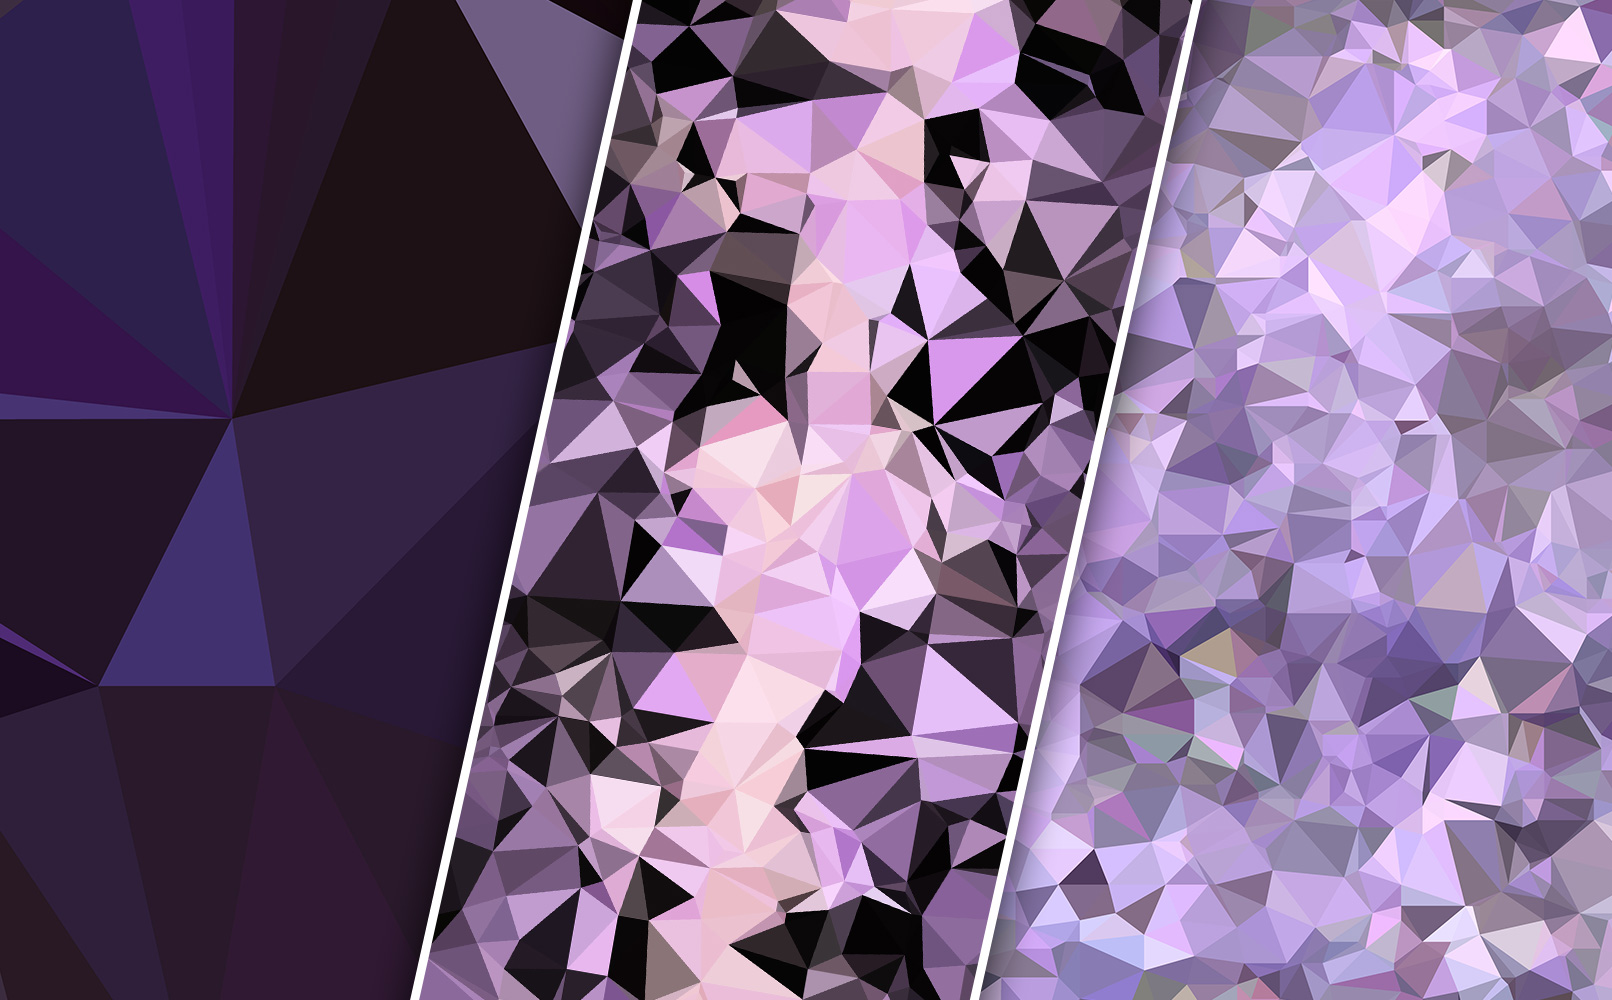 Low Poly Wallpapers in Violett